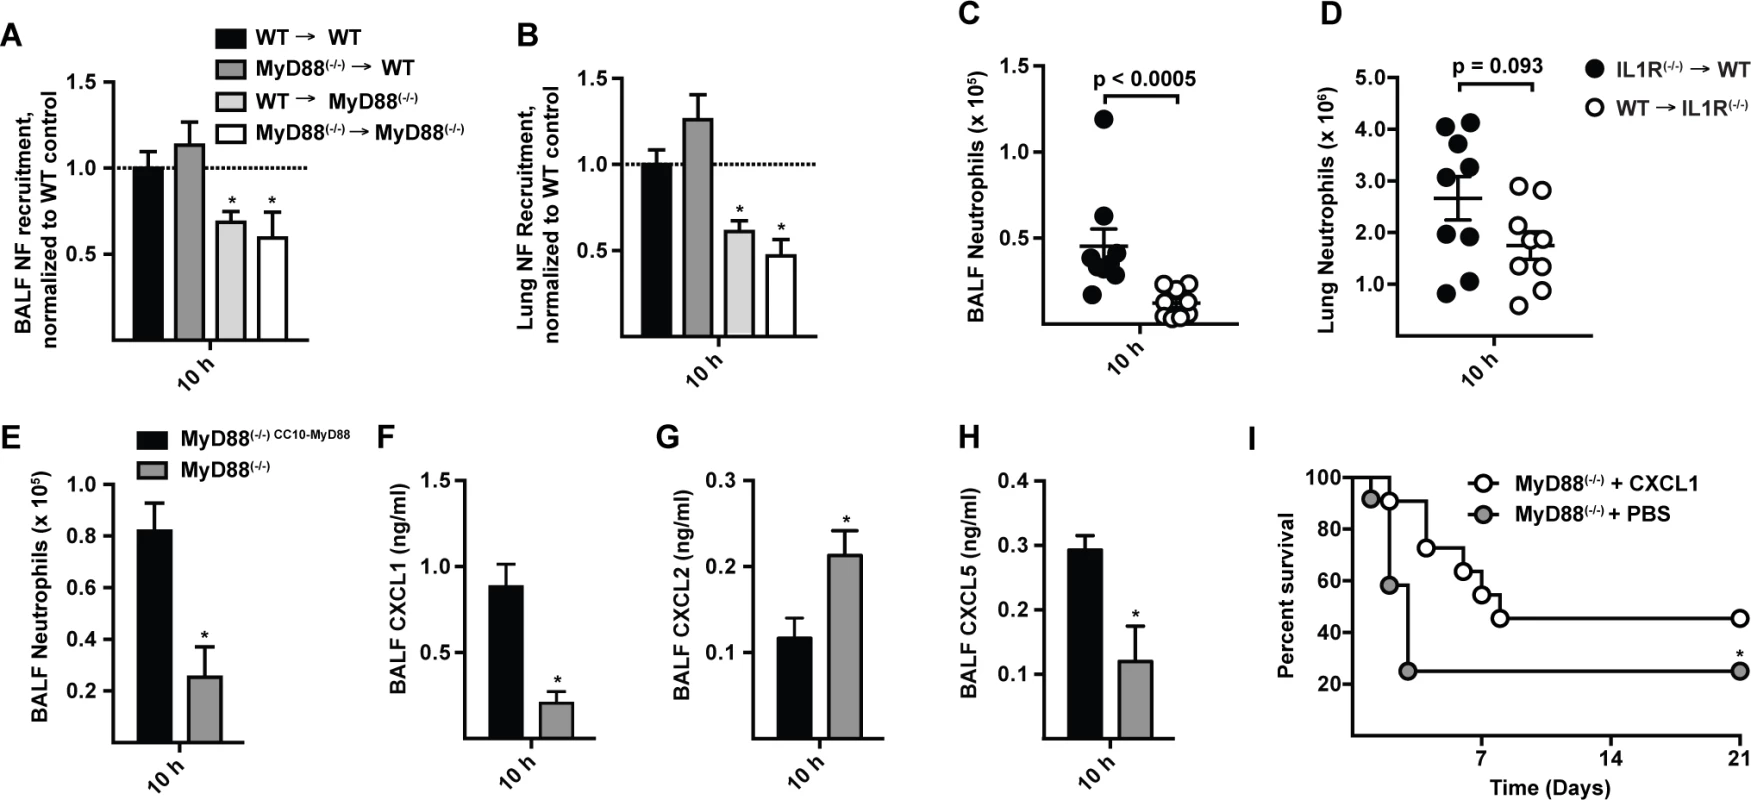 CXCL1 is controlled by MyD88 in lung epithelial cells and prolongs survival in MyD88<sup>(−/−)</sup> mice following <i>A. fumigatus</i> challenge.